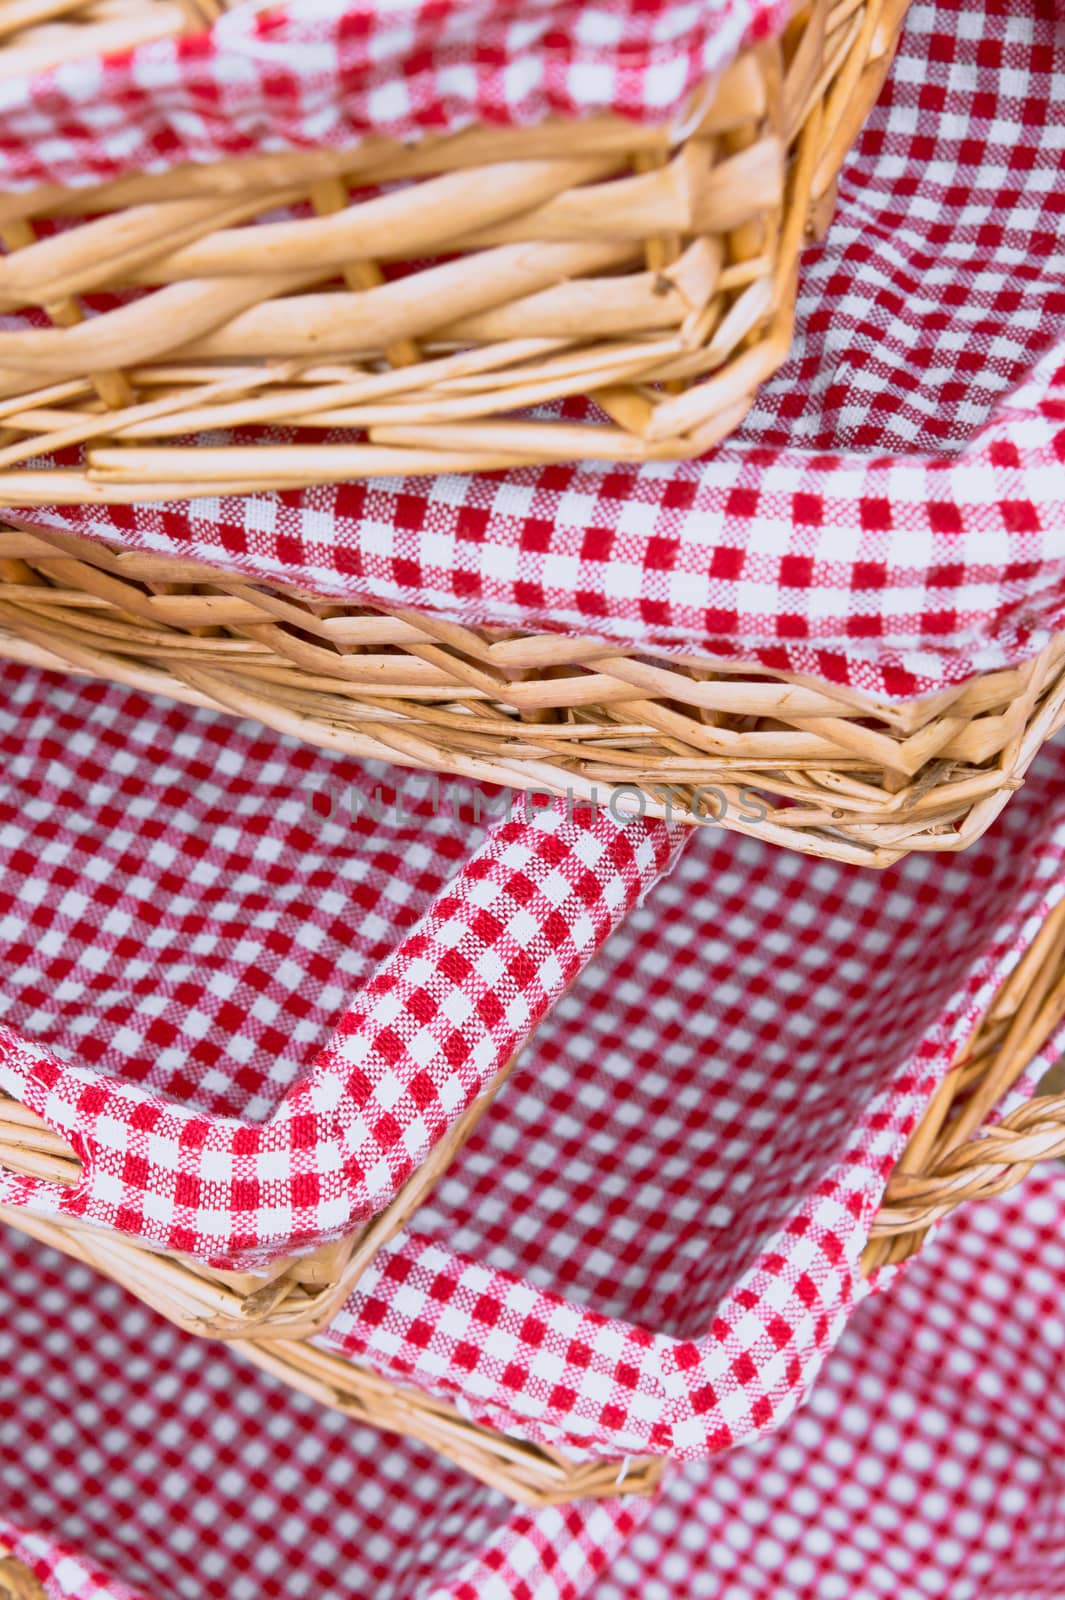 Pile of straw baskets lined by gingham cloths